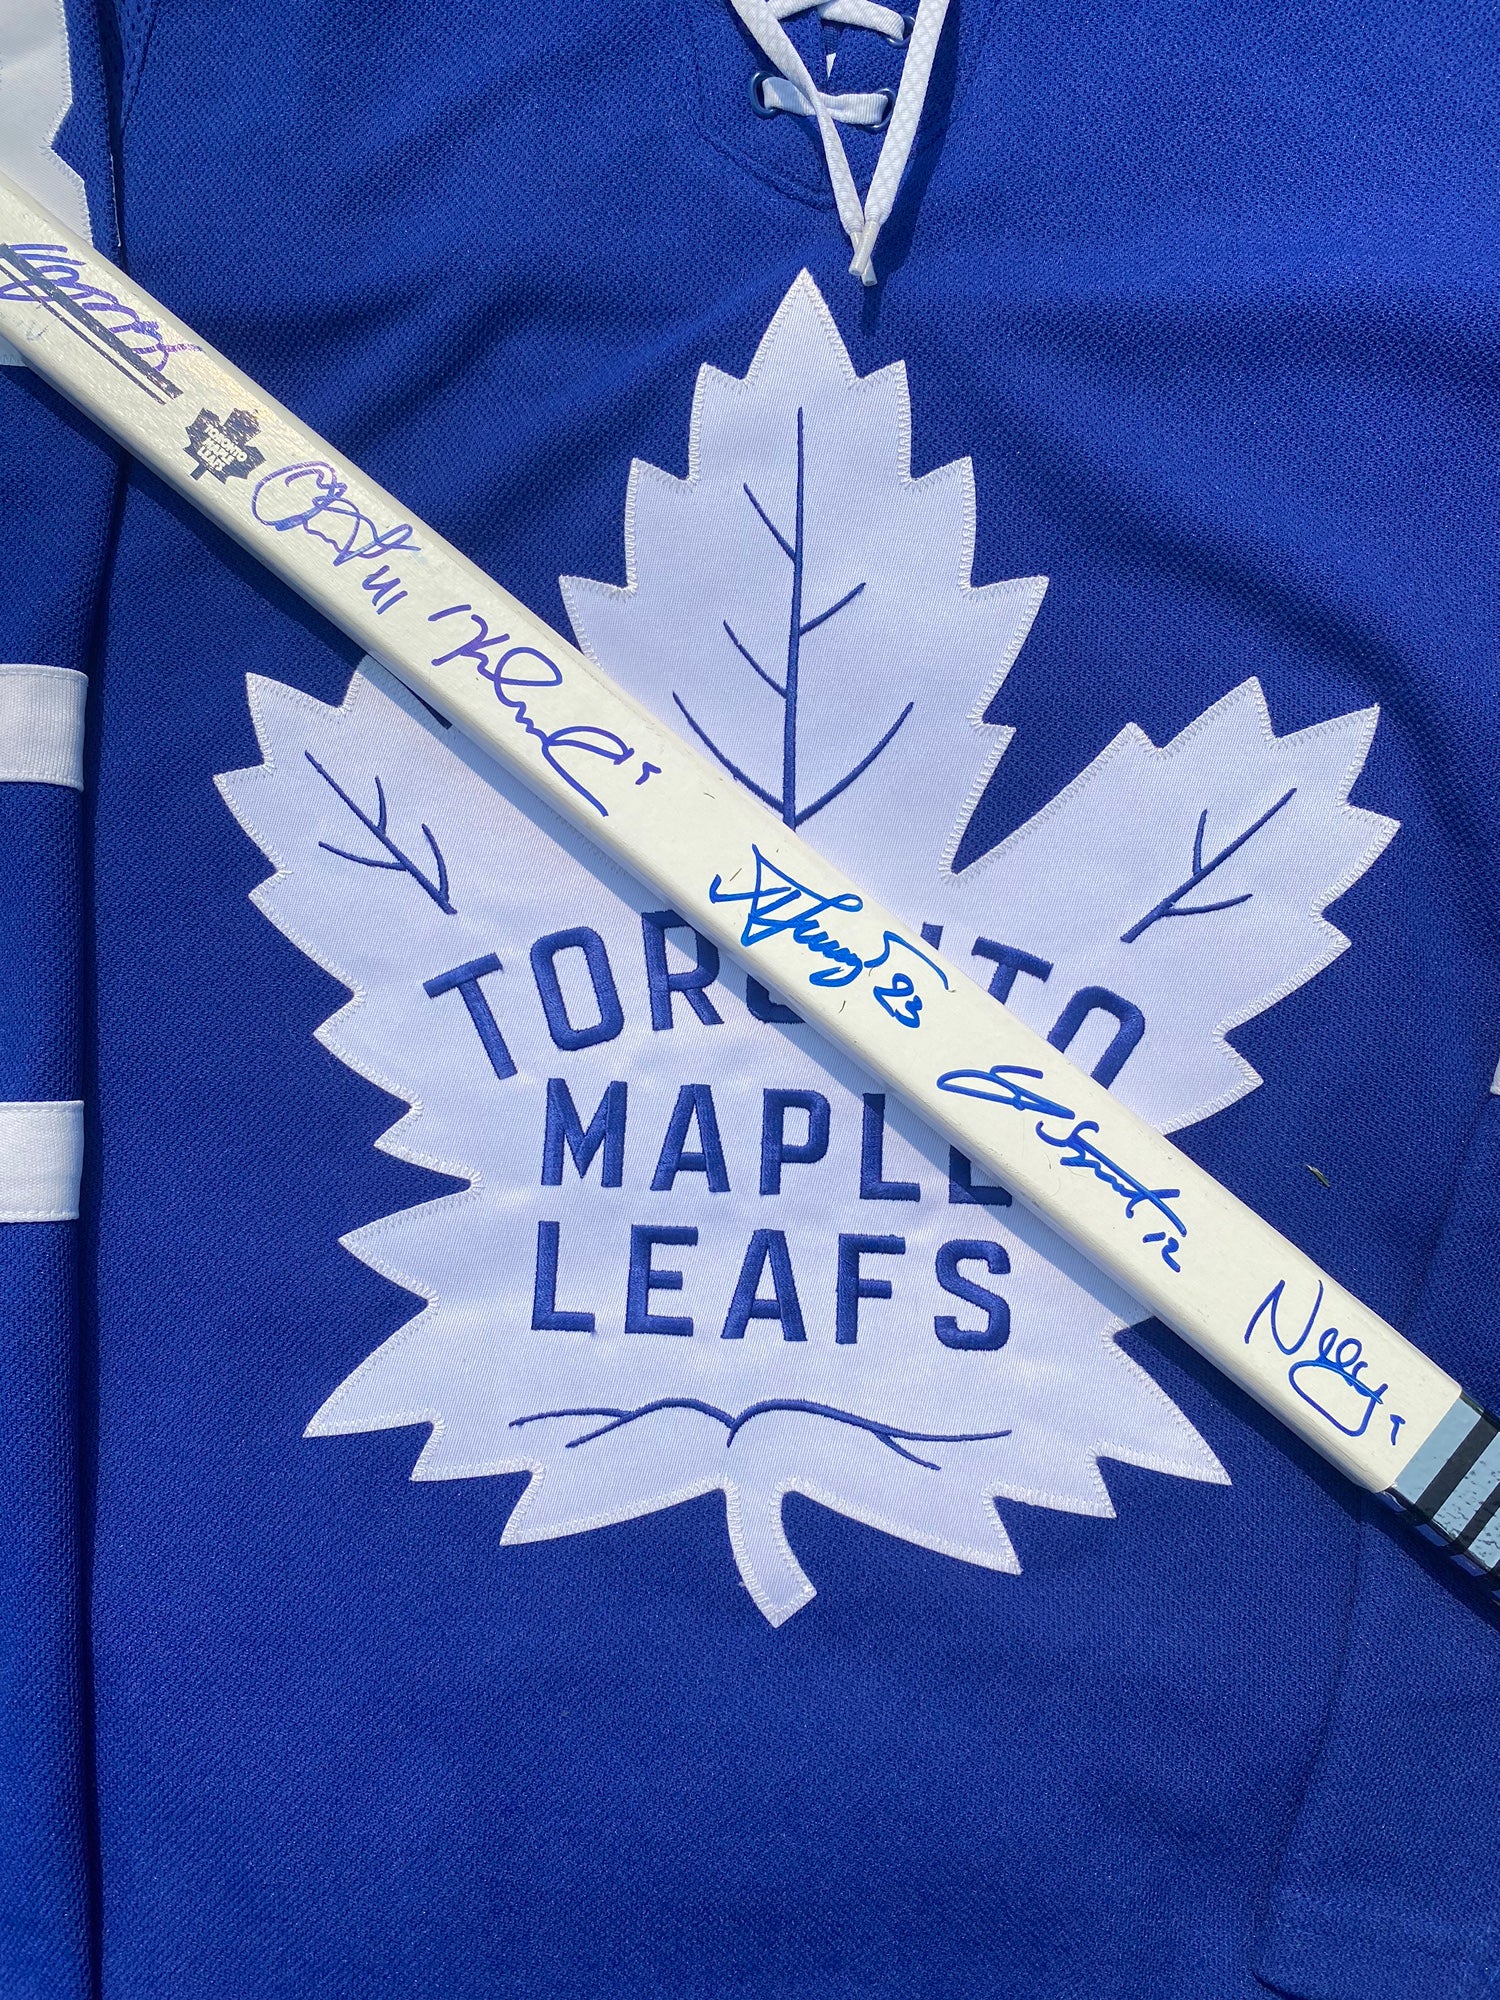 Toronto Maple Leafs Signed Jersey